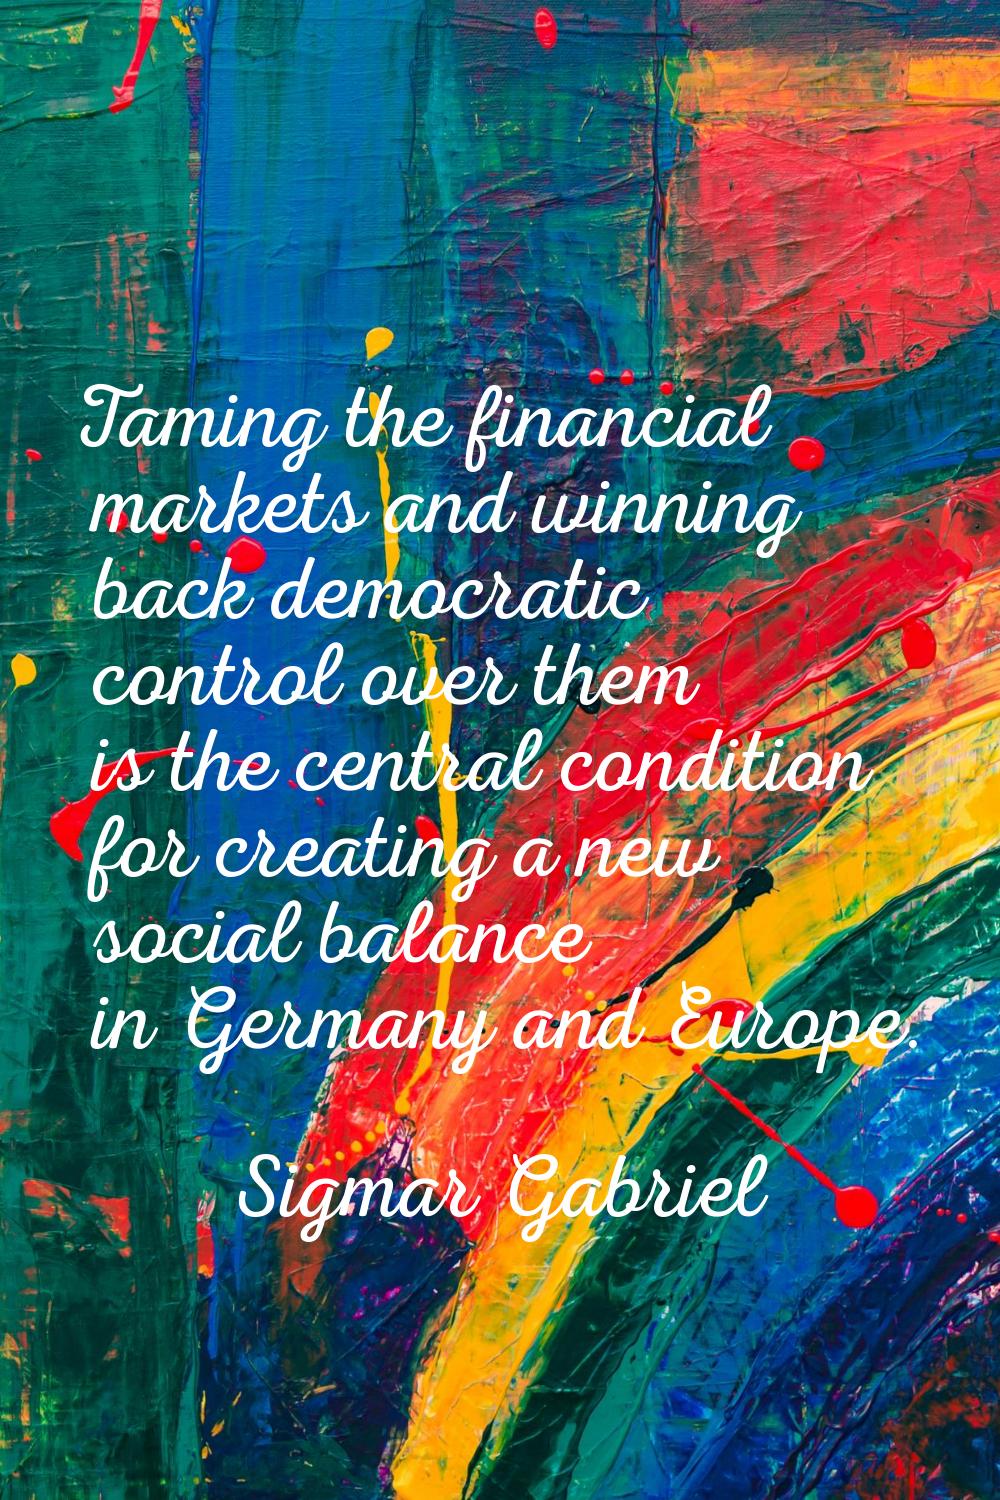 Taming the financial markets and winning back democratic control over them is the central condition